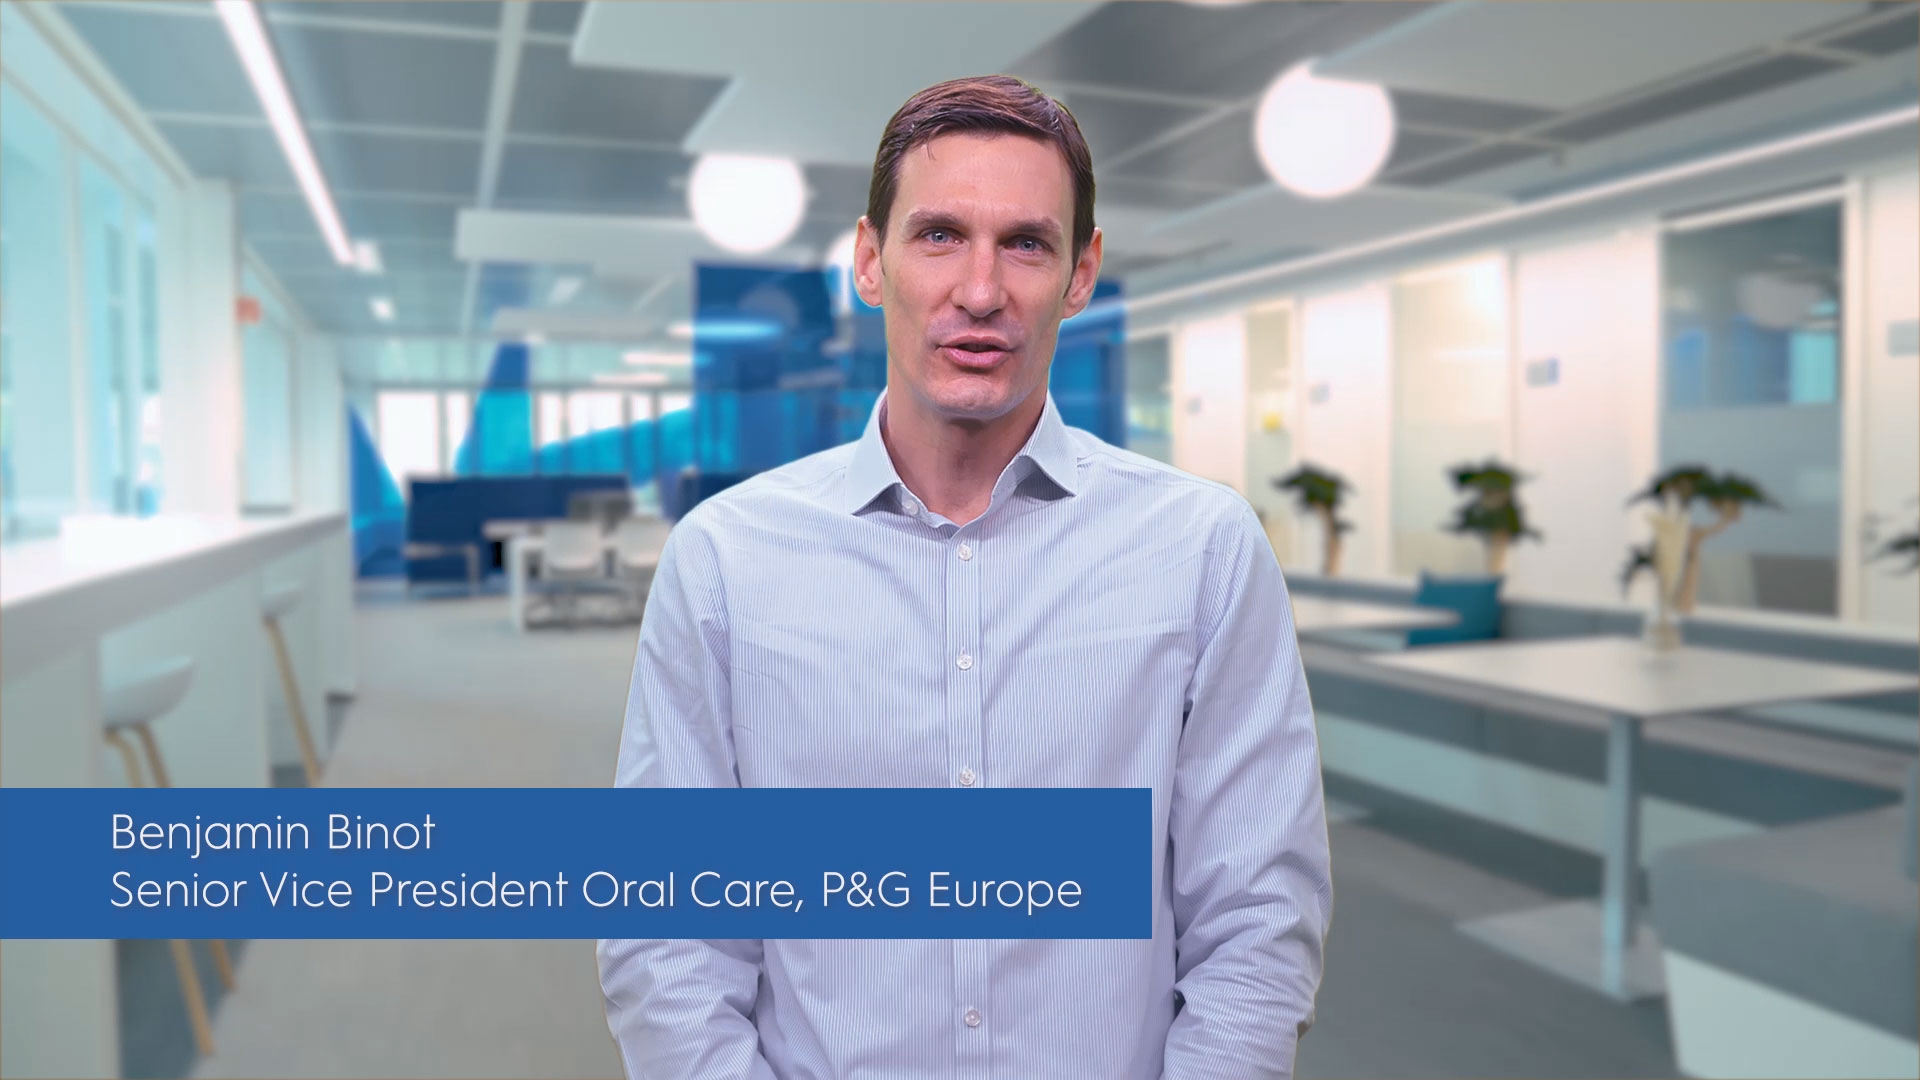 Oral-B unveil brand film to celebrate the launch of its Big Rethink campaign, to make oral care more inclusive and accessible for all.